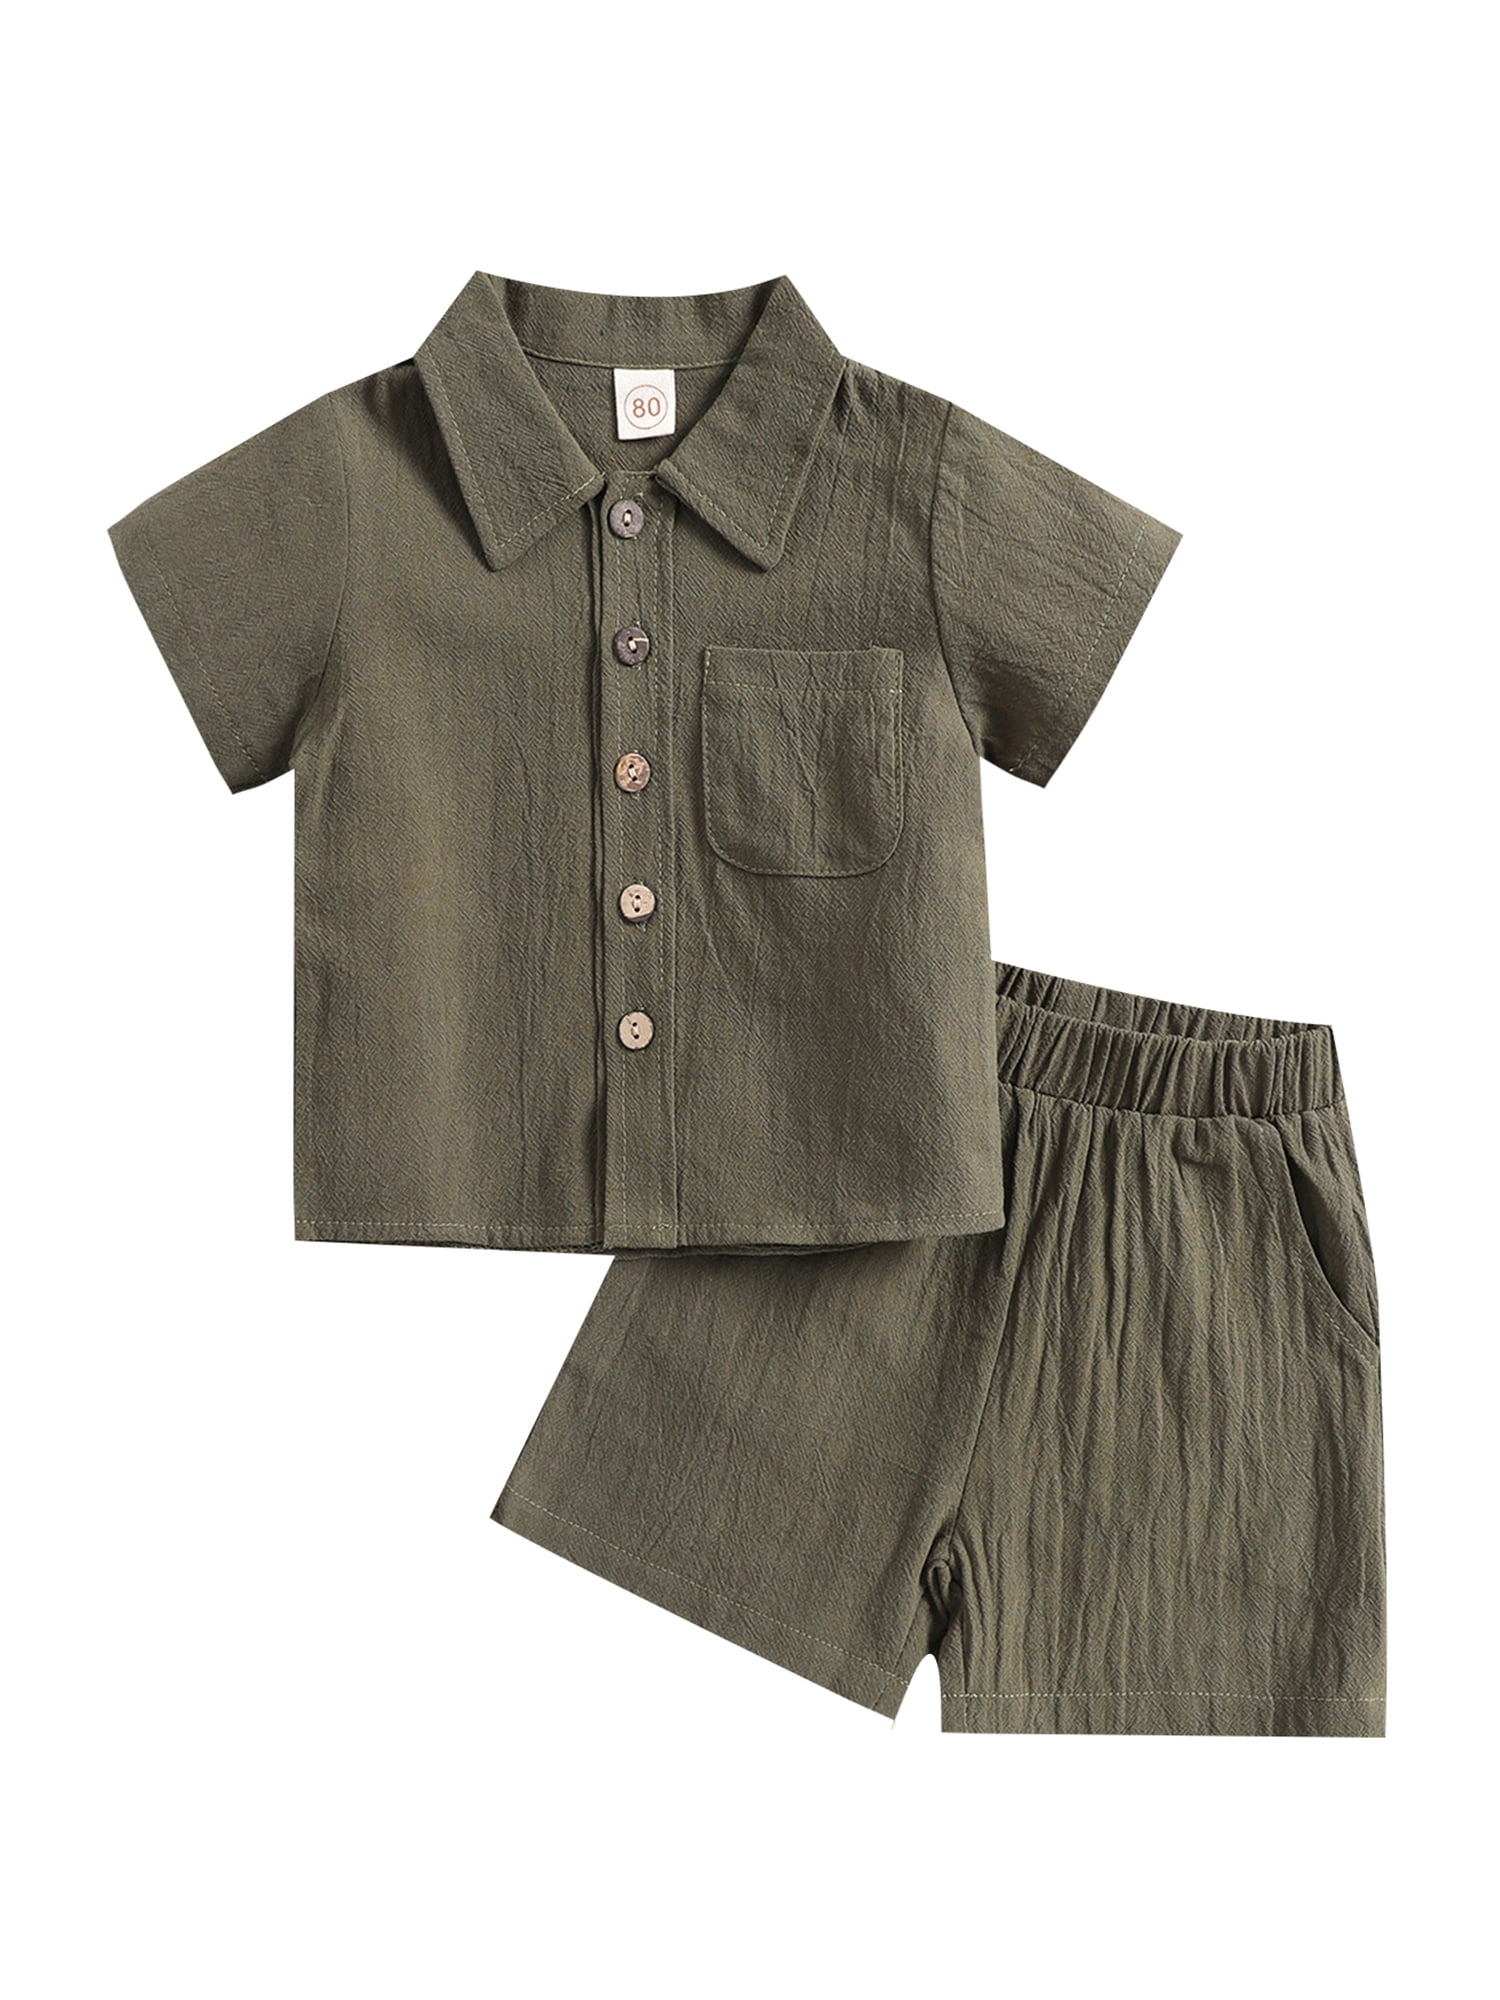 Springcmy Toddler Baby Boys Clothes Set Cotton Linen Short Sleeve Button  Down Shirt Top and Shorts 2PCS Summer Outfit D# Army Green 18-24 Months